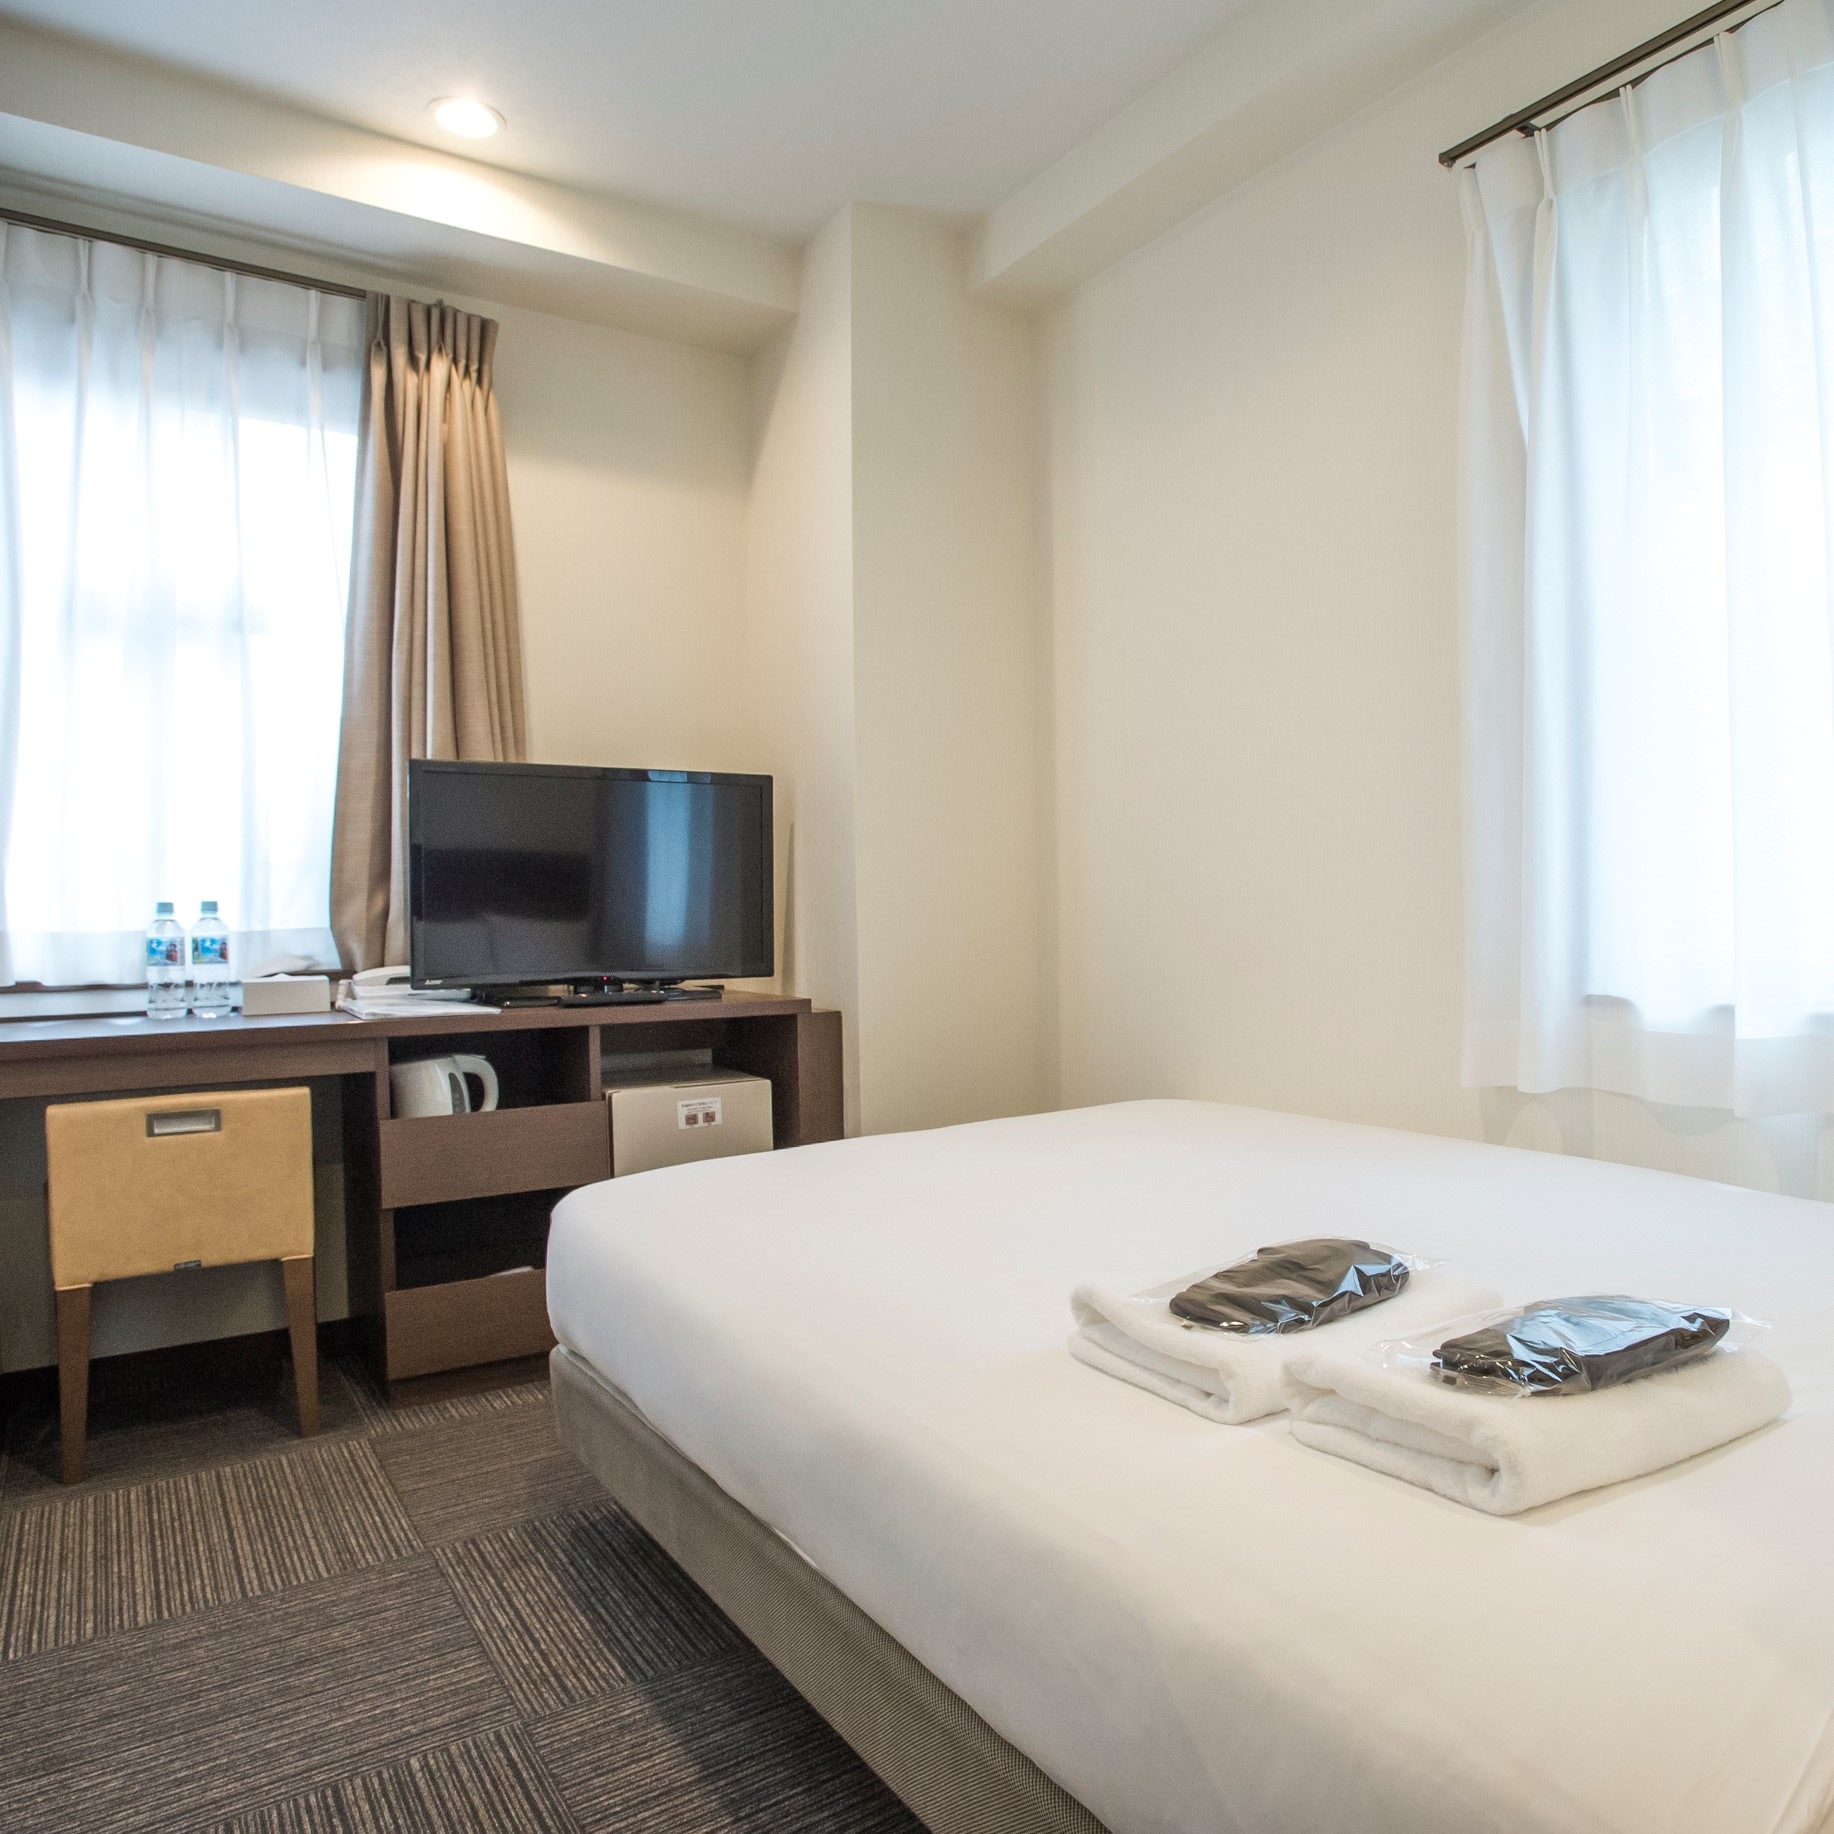 Economy Double Room (Semi-Double) Area 9㎡-10㎡ ・ All rooms are Simmons beds ♪ All rooms are equipped with washlets ♪